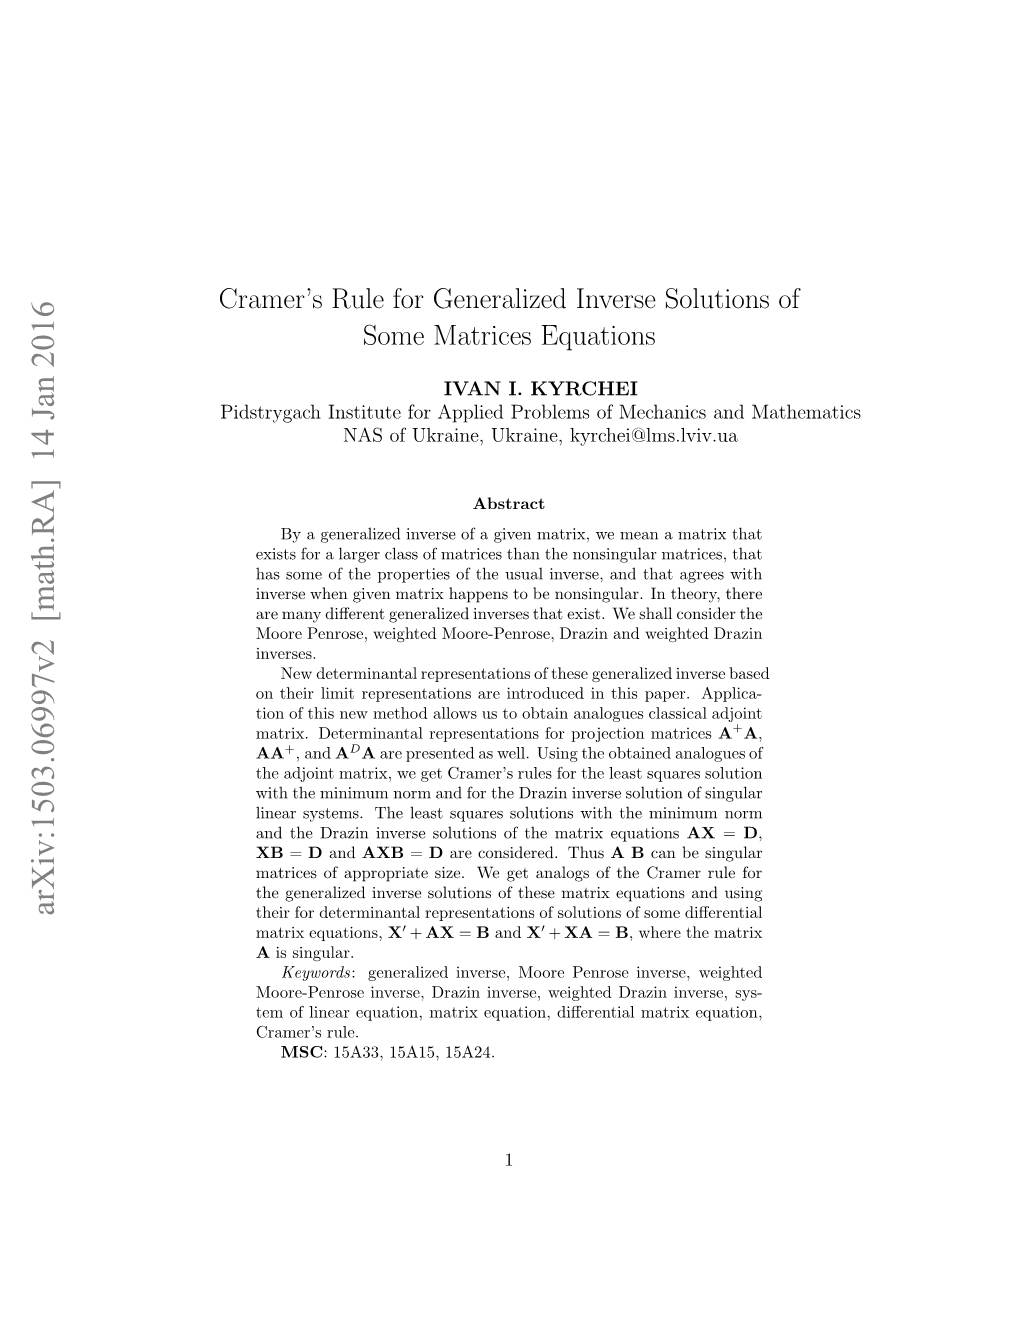 Cramer's Rule for Generalized Inverse Solutions of Some Matrices